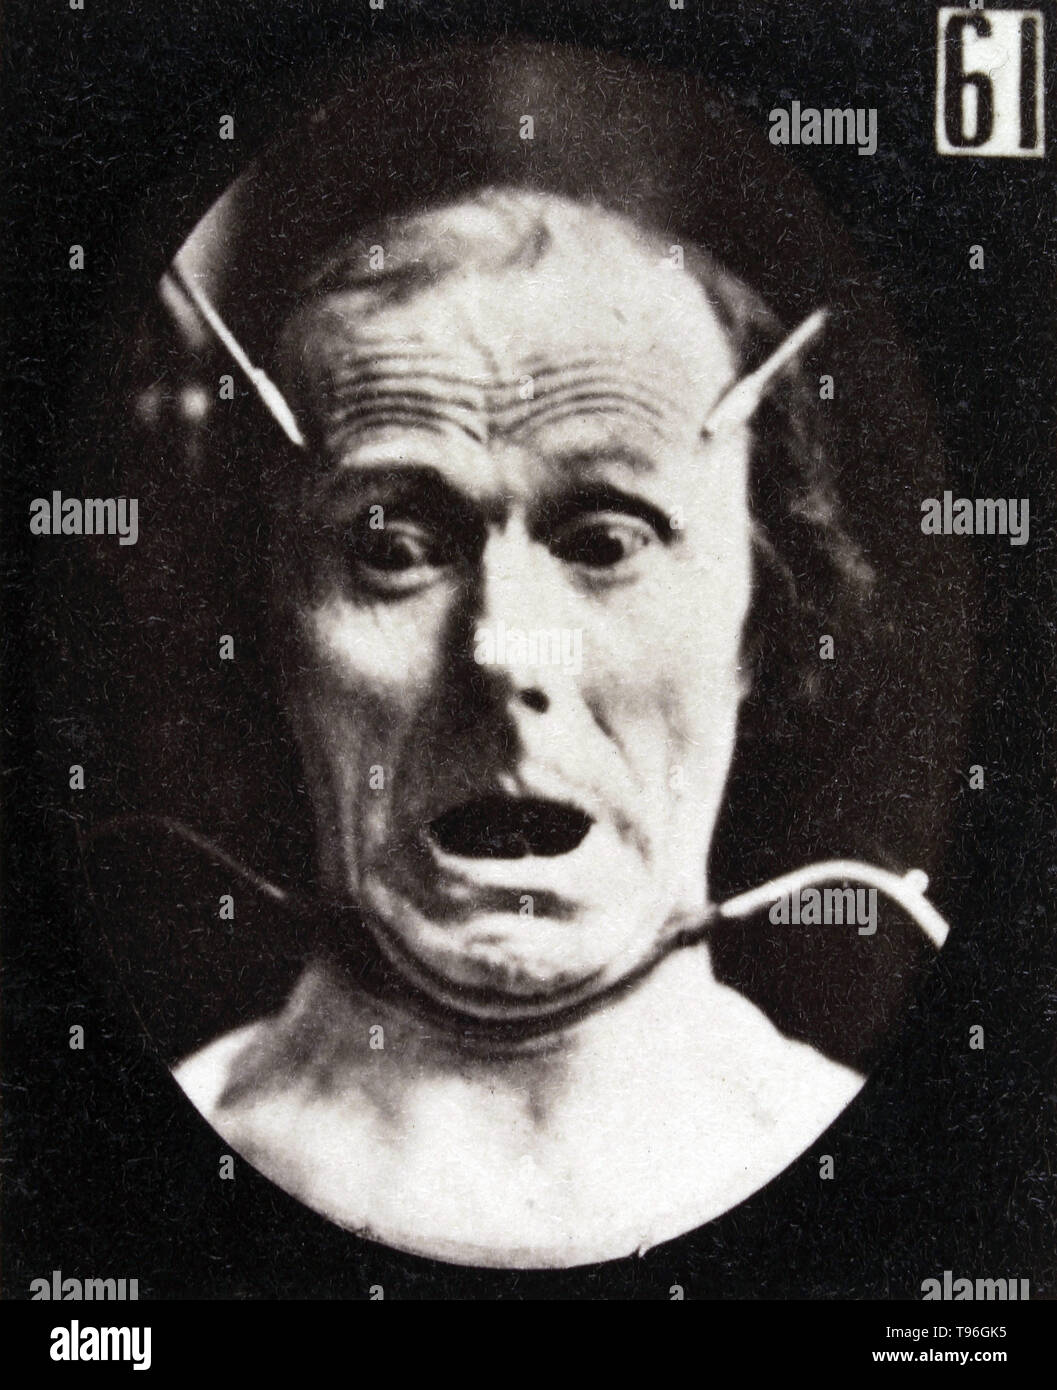 The facial expression of fear on the human face being induced by electrical currents. Guillaume-Benjamin-Amand Duchenne de Boulogne (September 17, 1806 - September 15, 1875) was a French neurologist who advanced the science of electrophysiology. Influenced by the beliefs of physiognomy, Duchenne wanted to determine how the muscles in the human face produce facial expressions which he believed to be directly linked to the soul of man. Stock Photo